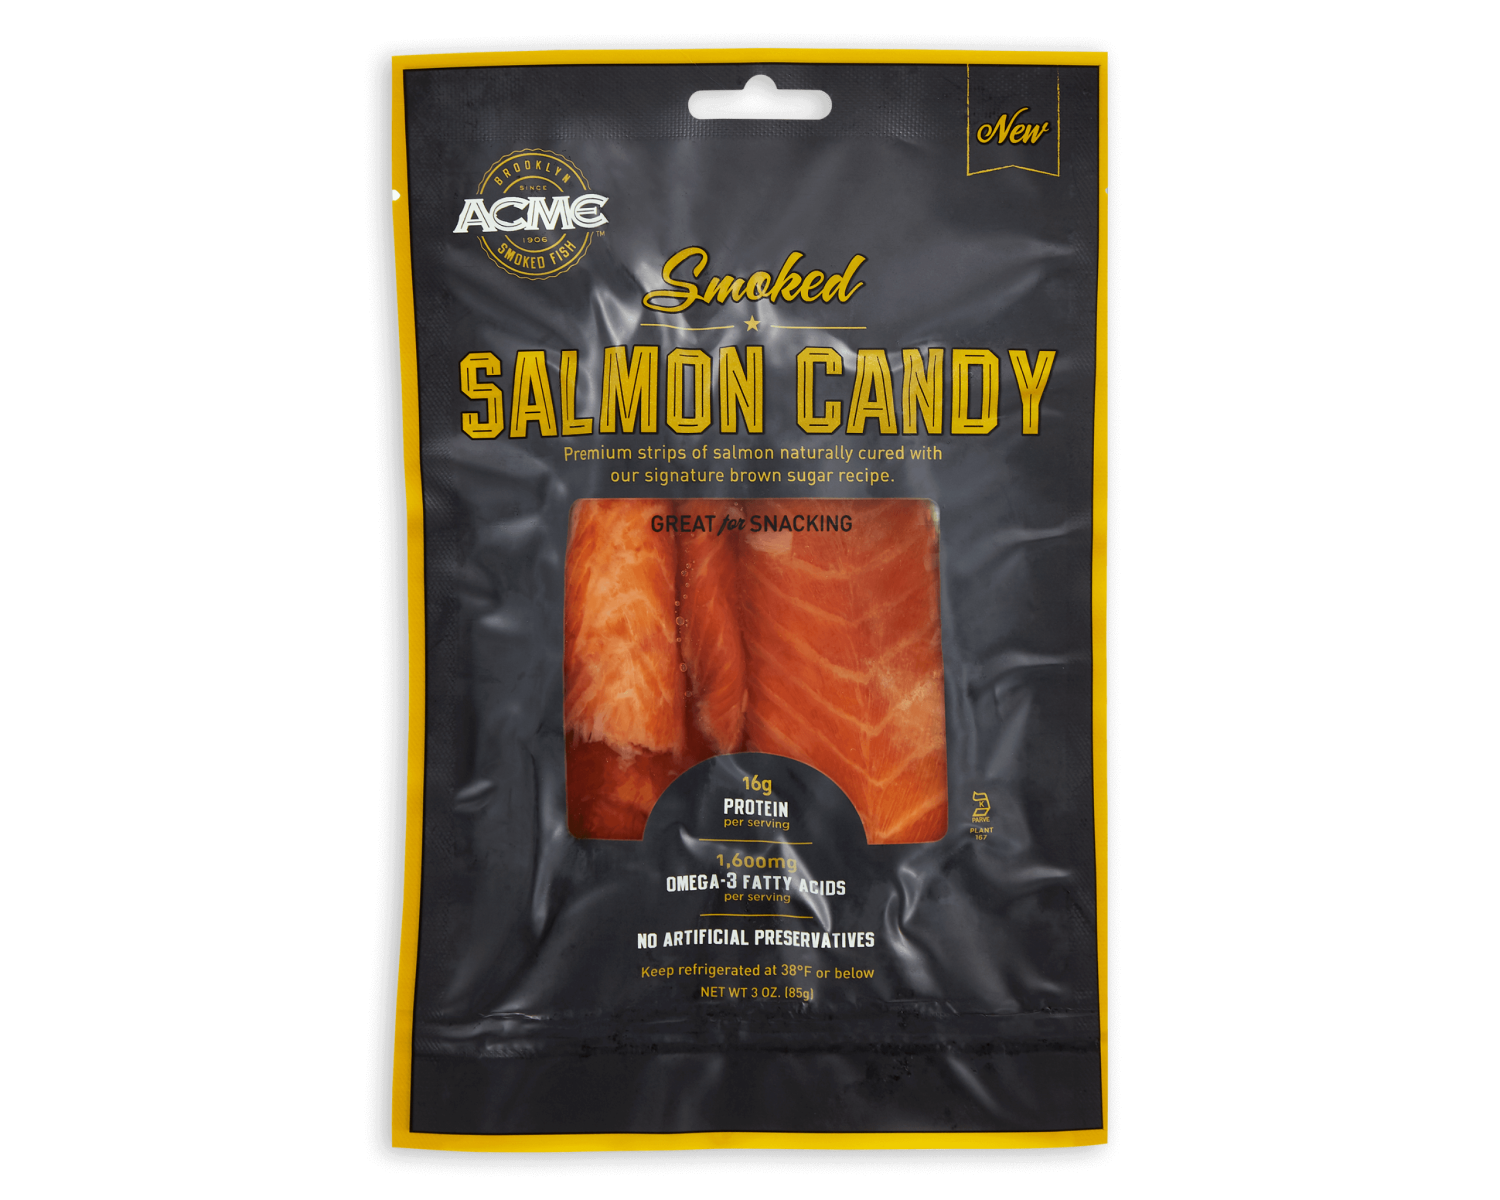 Salmon Candy (1 lb.) - NOT KP - Acme Smoked Fish